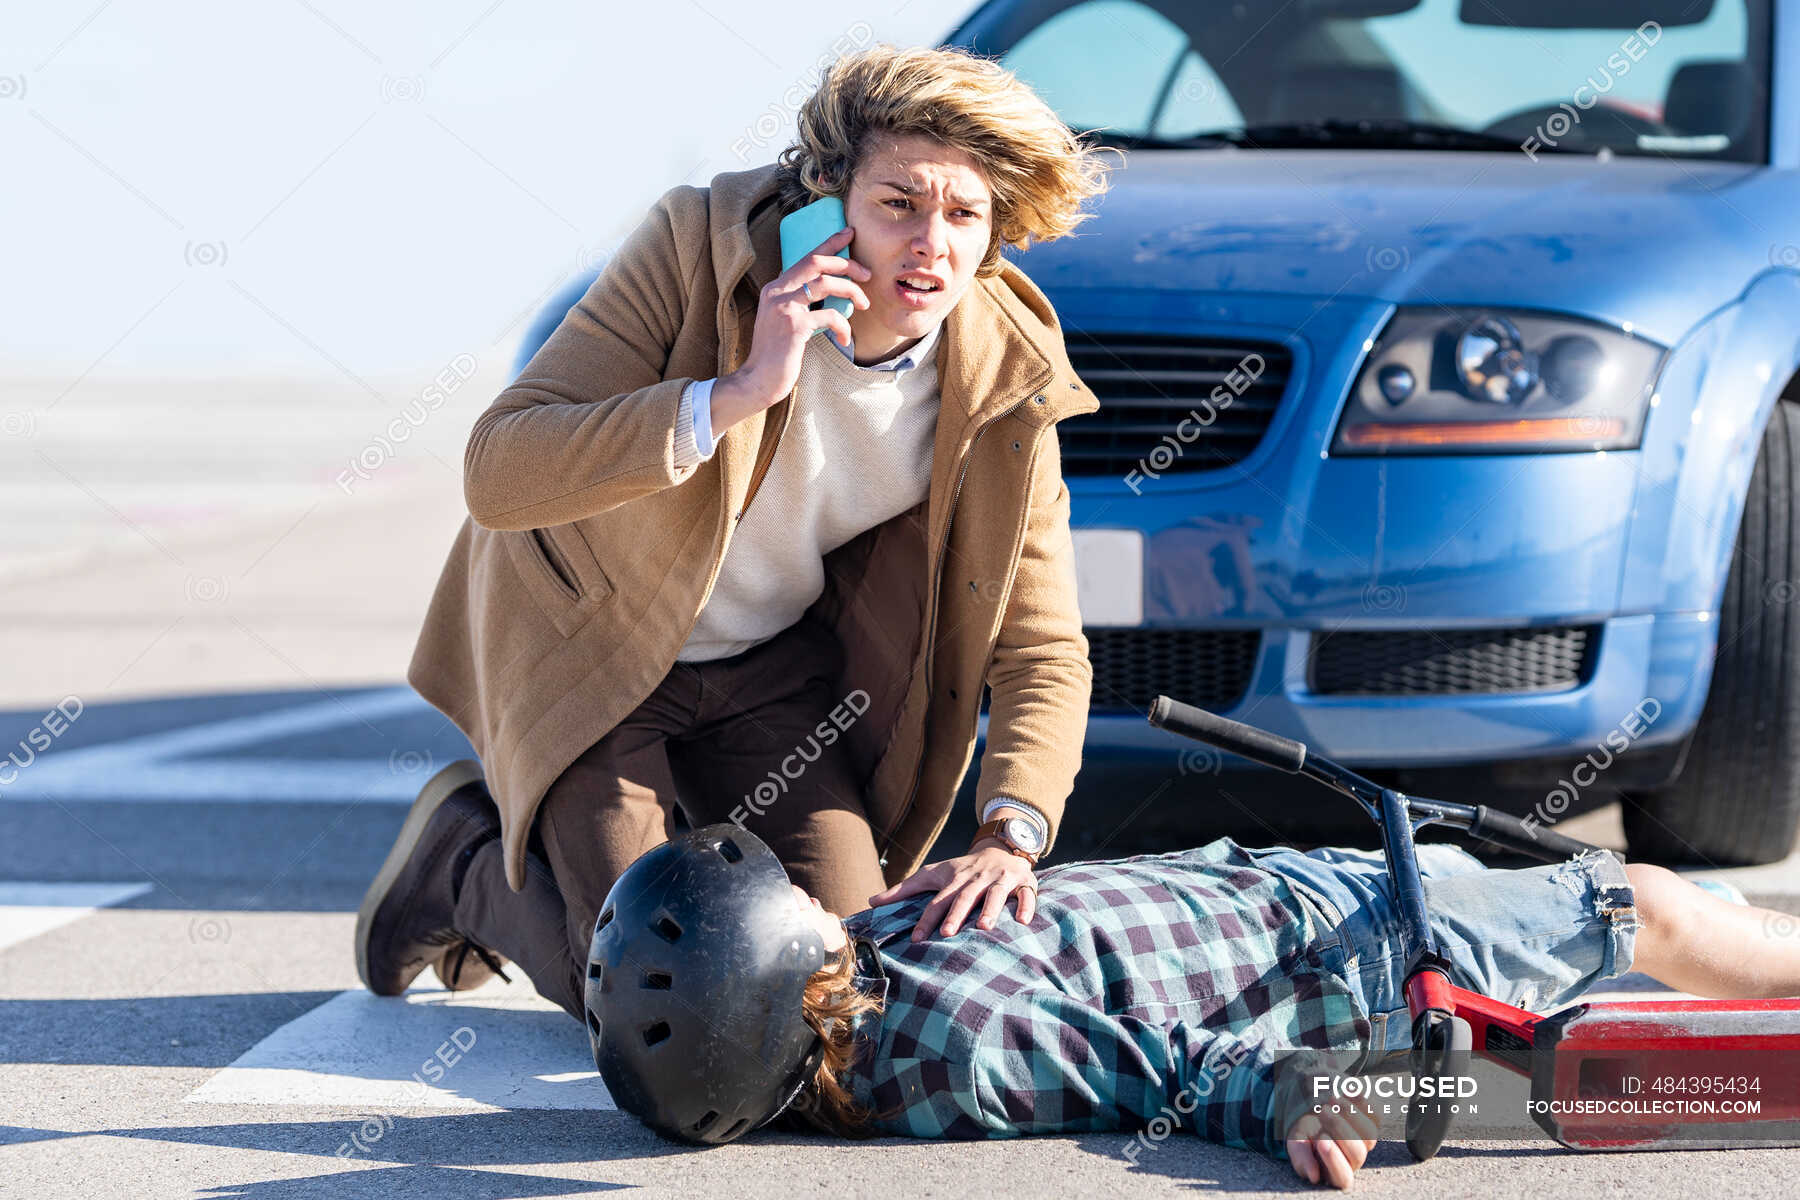 Young man calling help on mobile phone with boy in background lying on road  after car accident — spain, outdoors - Stock Photo | #484395434